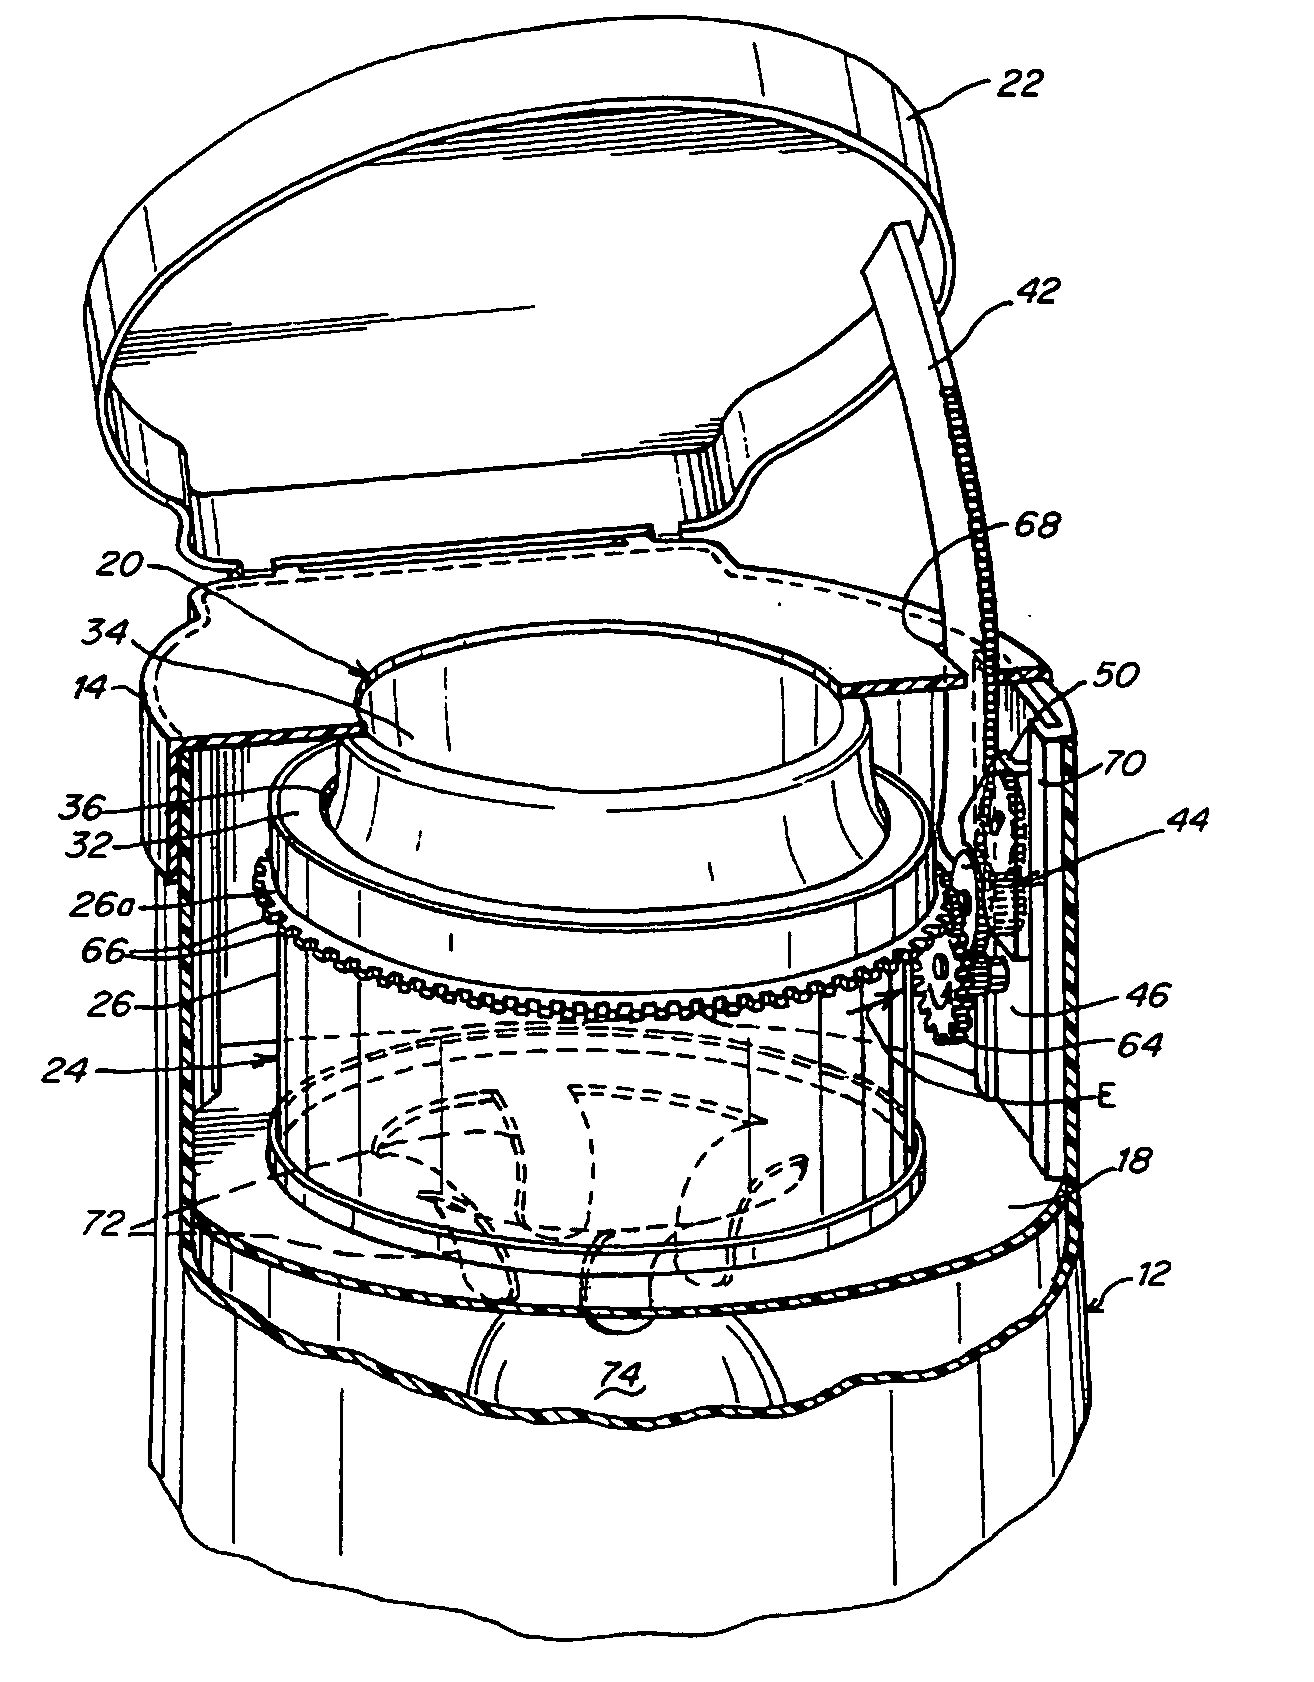 Waste disposal device including a rotatable geared rim to operate a cartridge